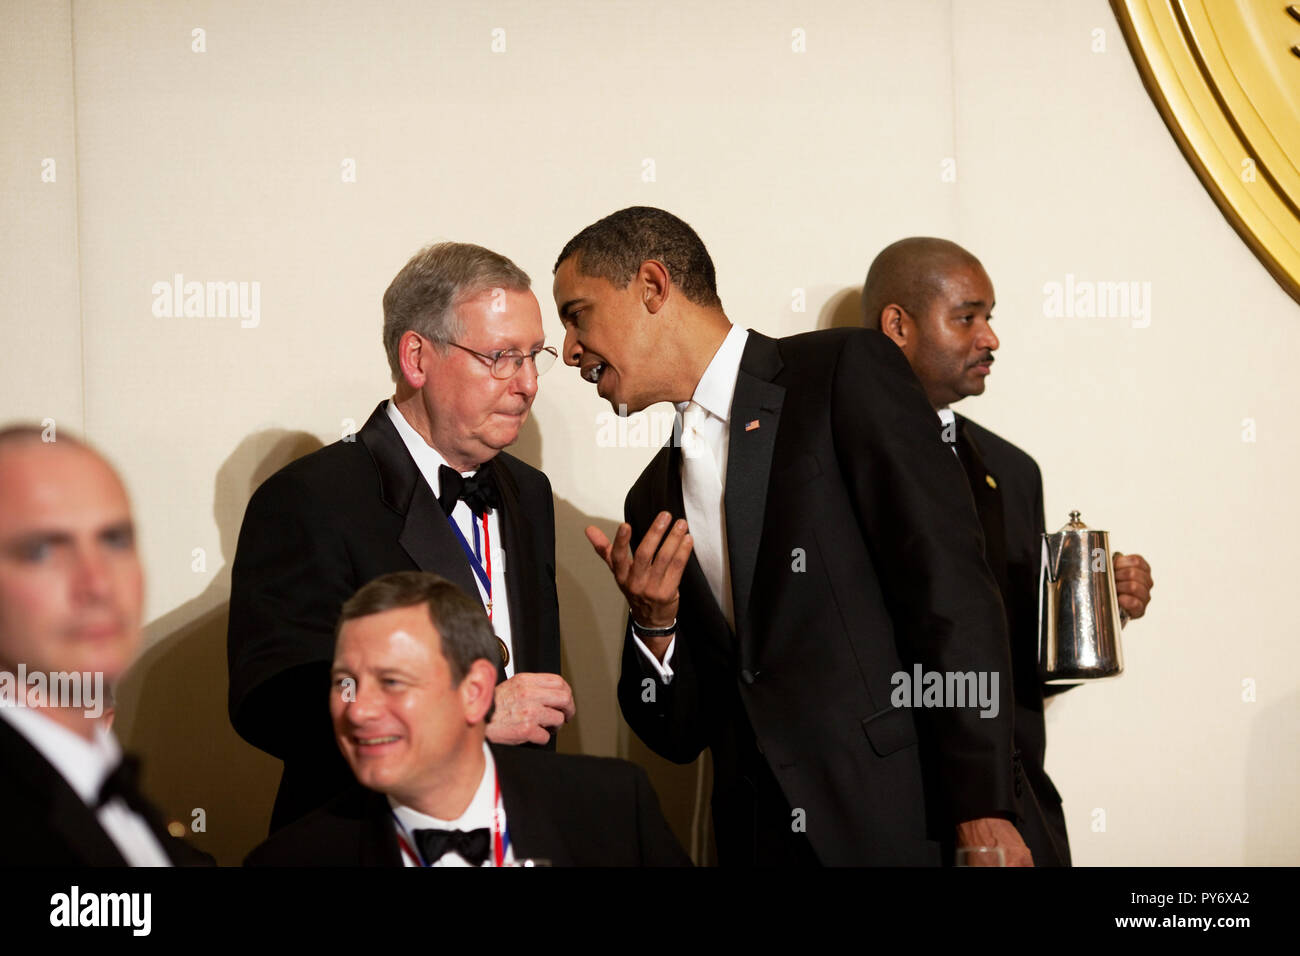 President Barack Obama speaks with Senate Minority Leader Mitch McConnell at the Annual Alfalfa Dinner at the Capital Hilton Hotel, Washington, D.C.  1/31/09  Official White House Photo by Pete Souza Stock Photo